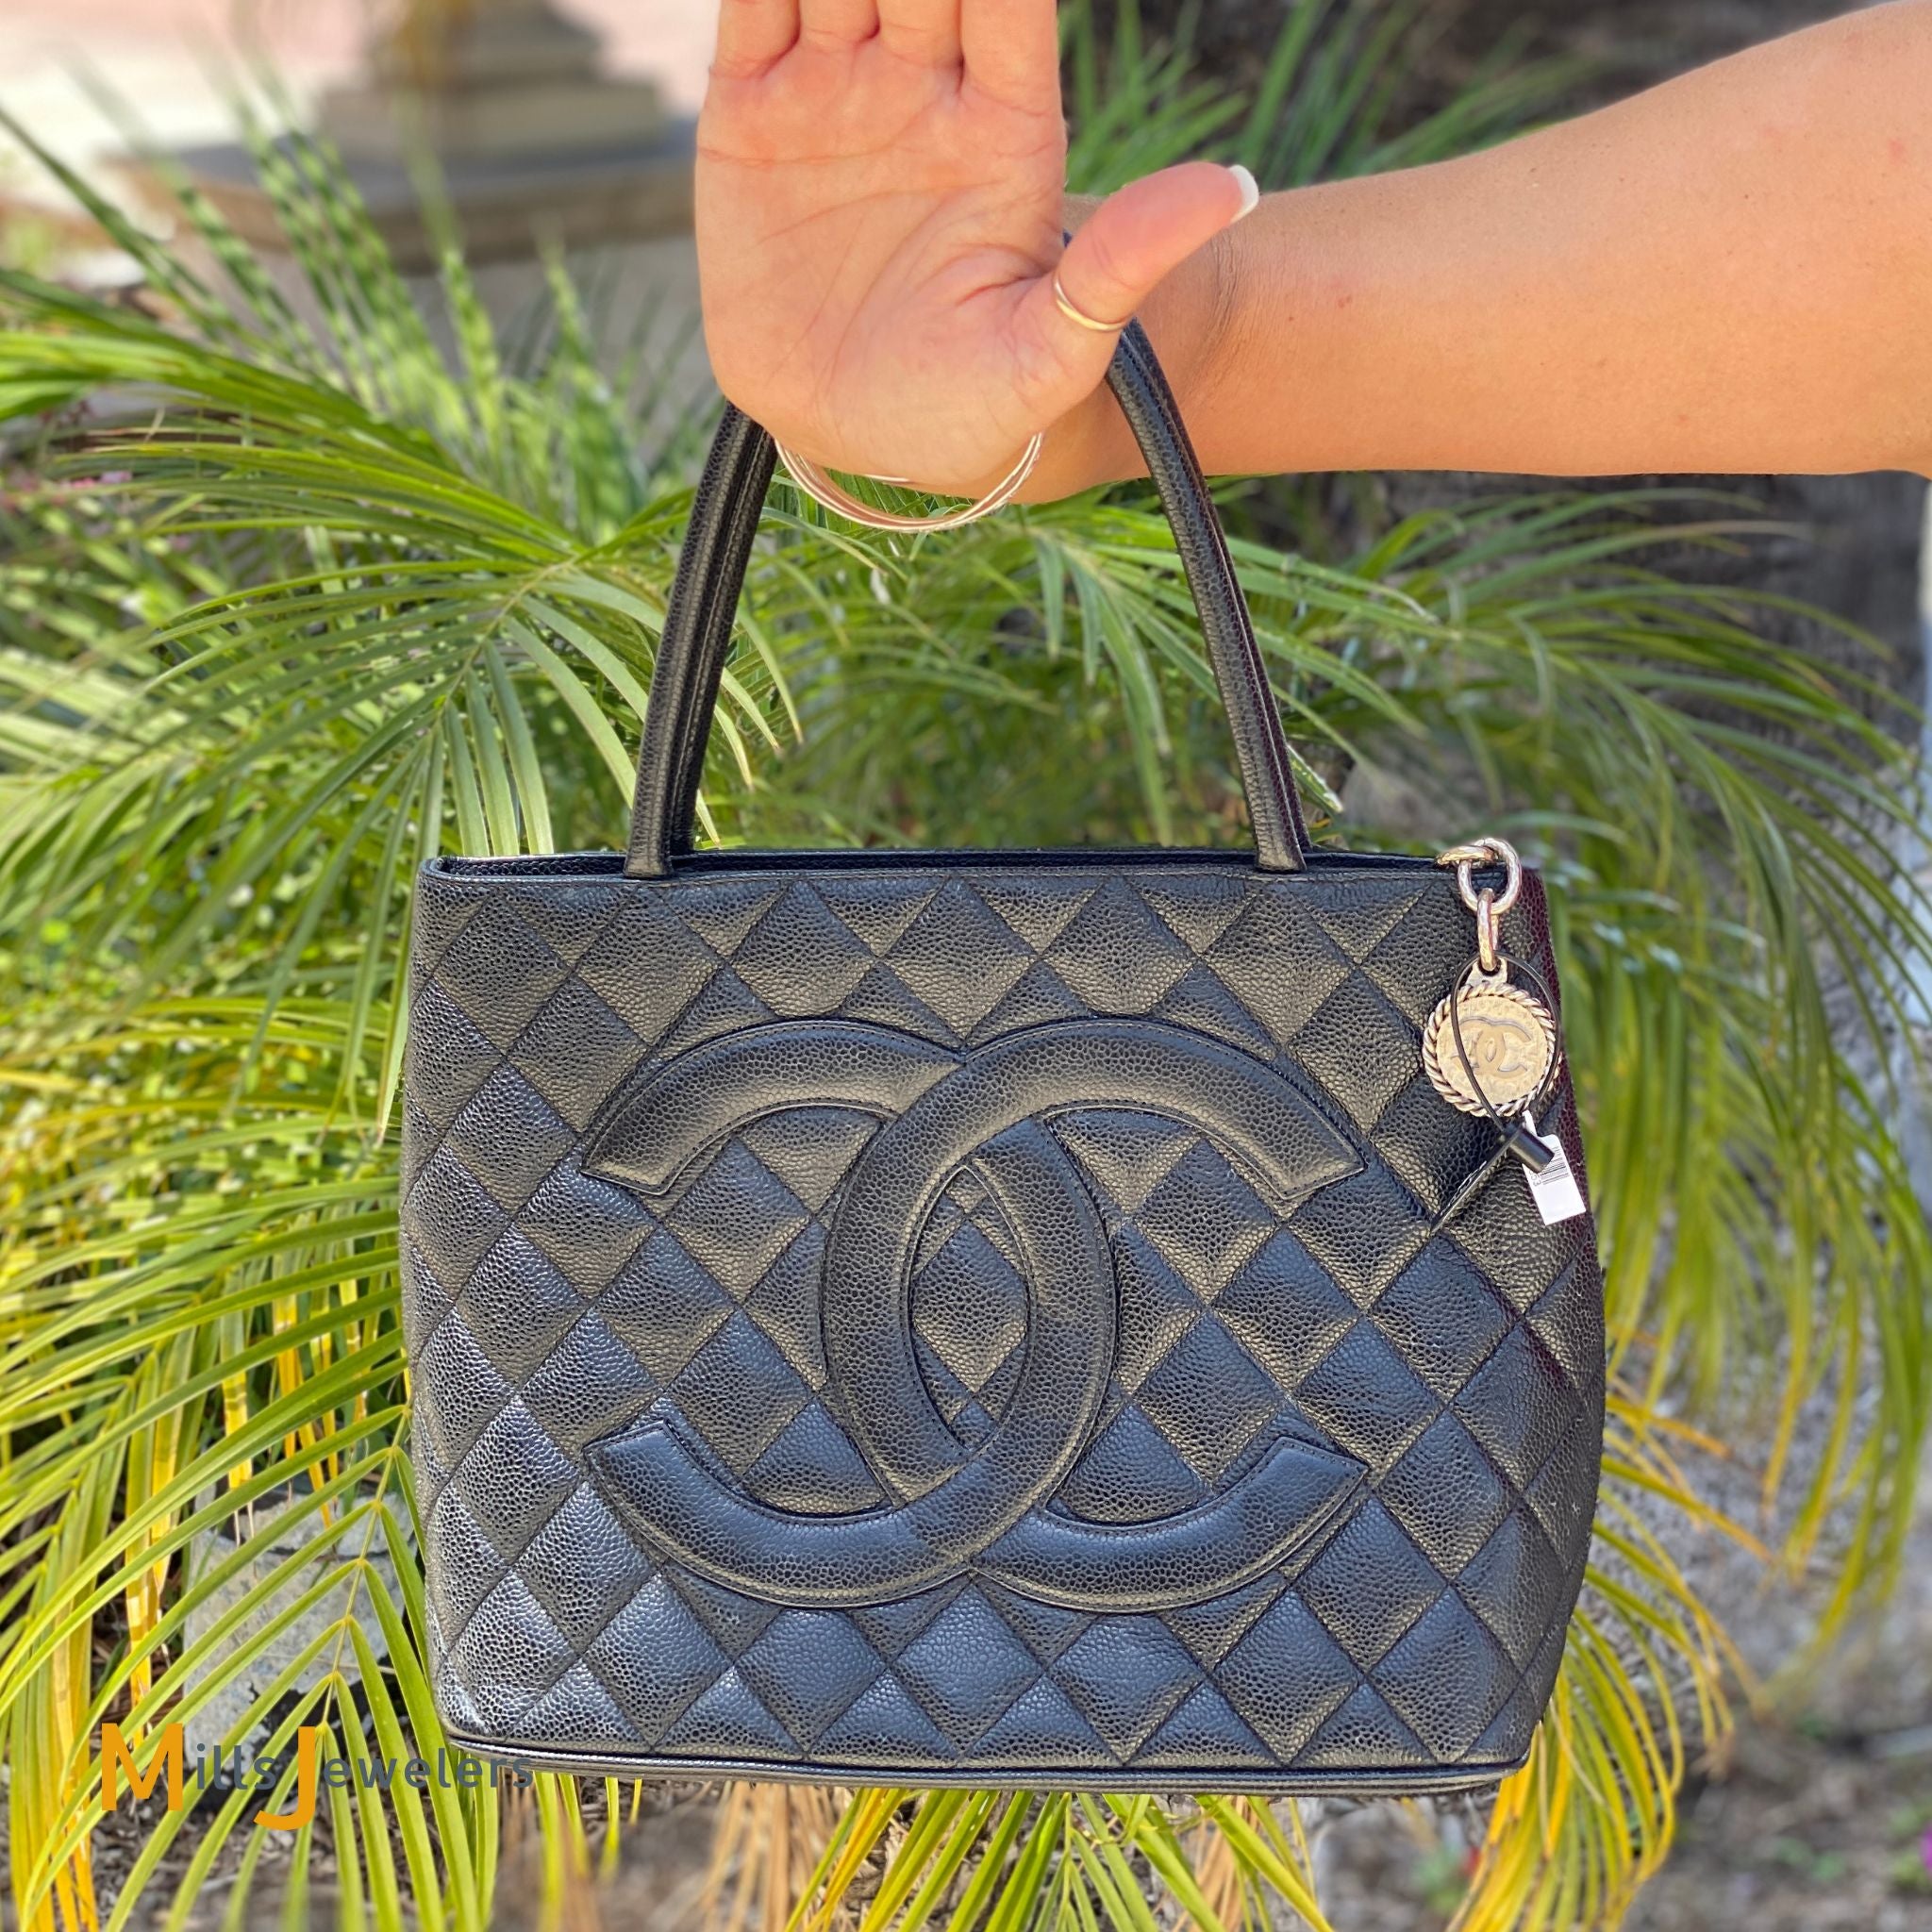 Classic , Chic & Chanel ! Such a great size ! Quilted Caviar Medallion Tote  (14 x 9 x 5)